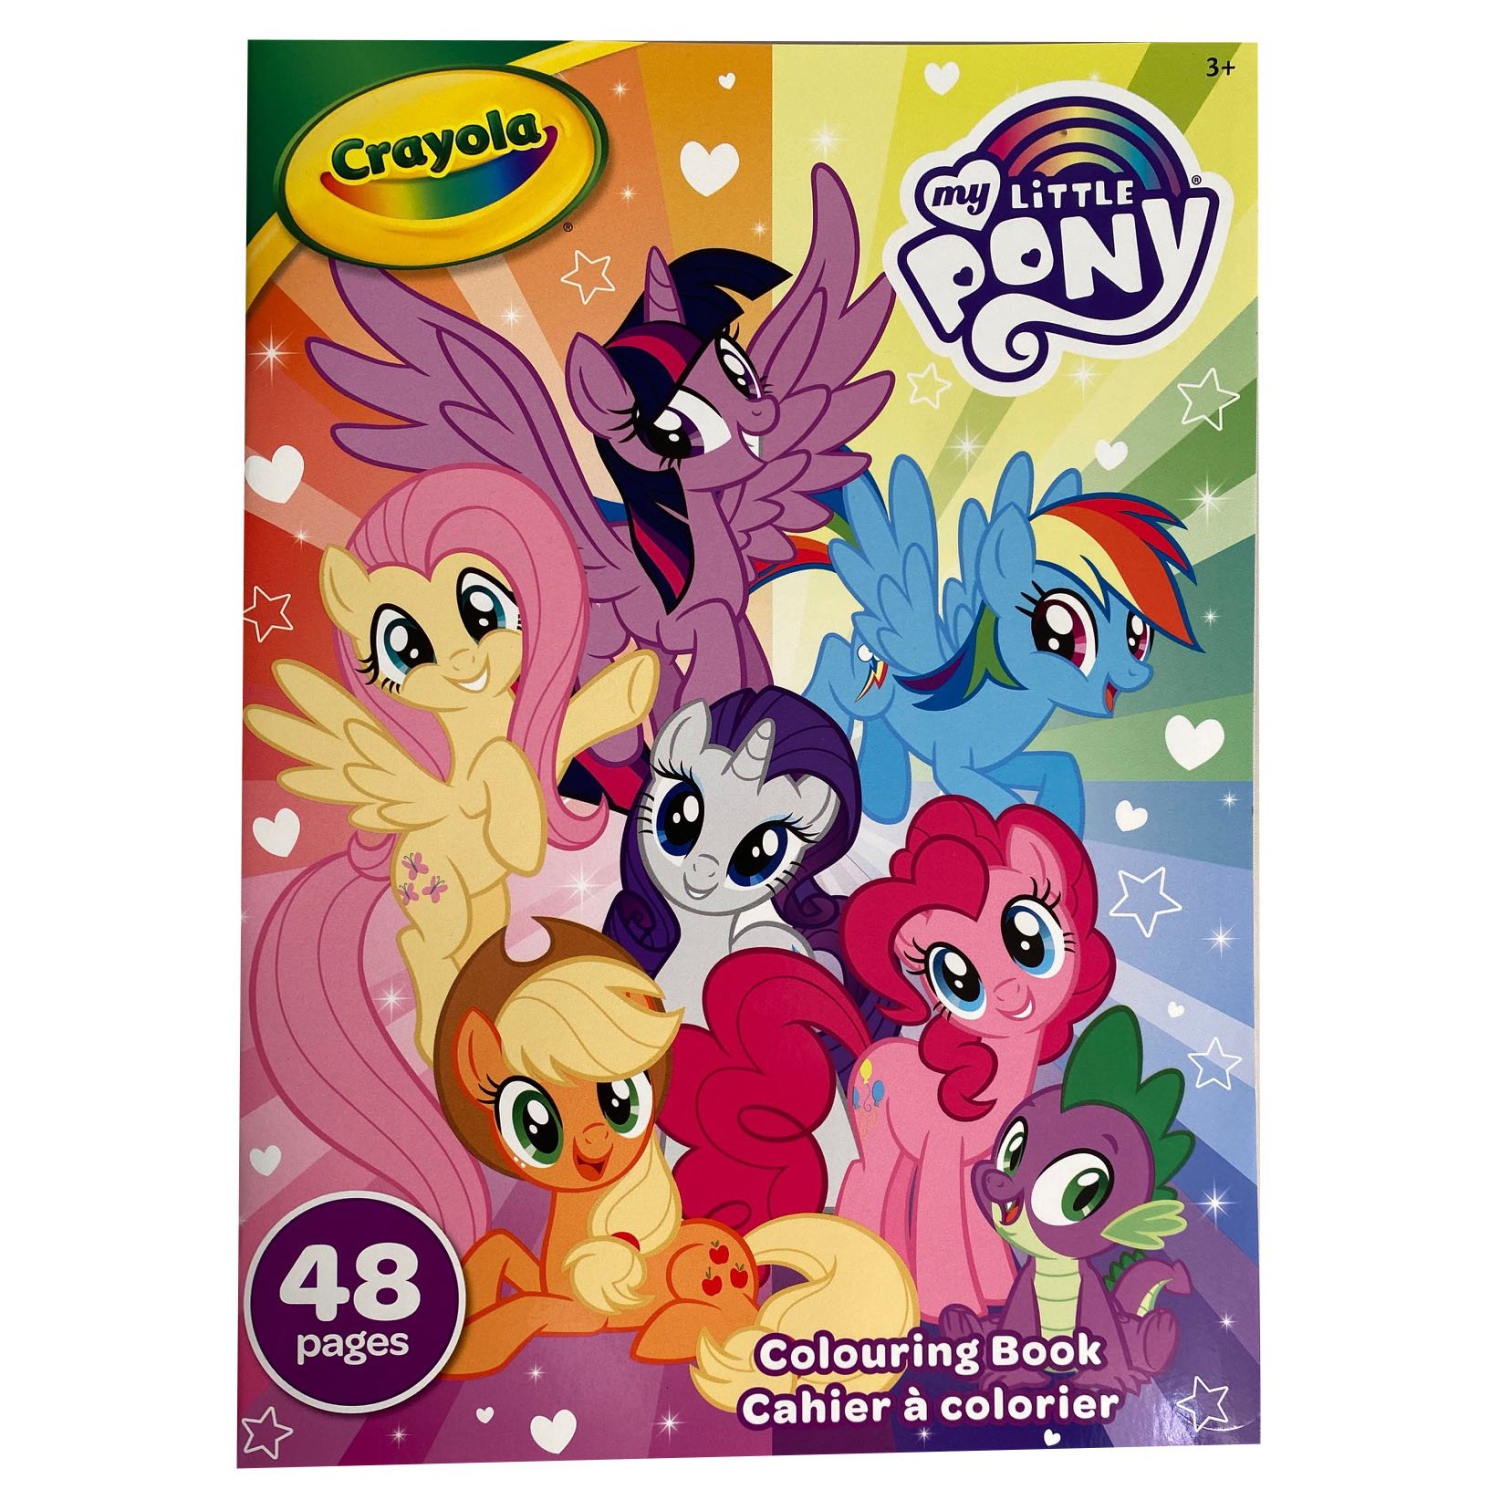 Crayola My Little Pony 48-Page Coloring Book